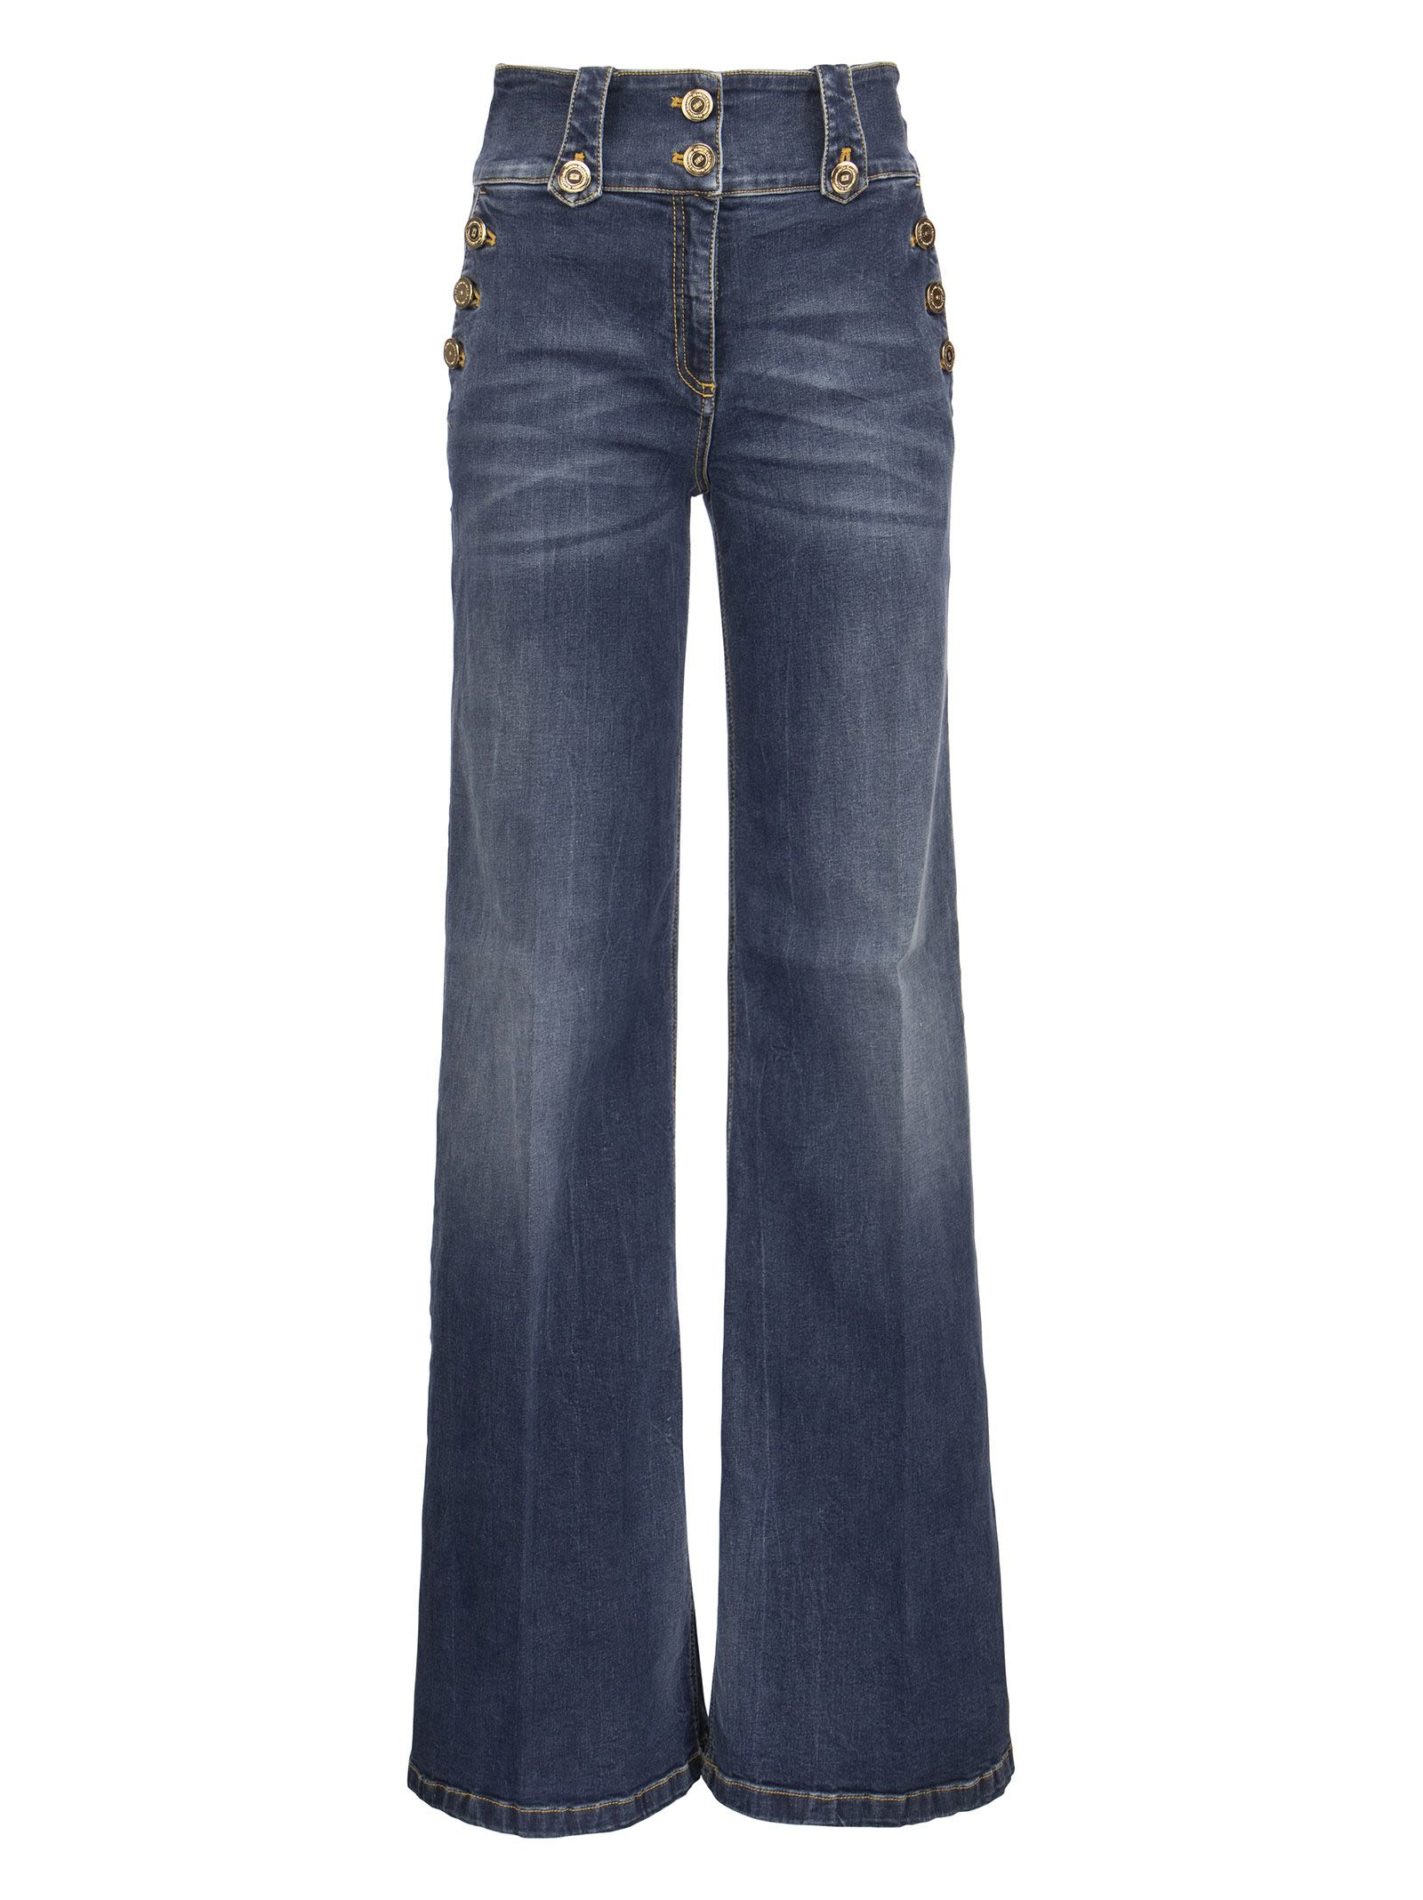 High-waisted jeans with gold buttons - Bellettini.com